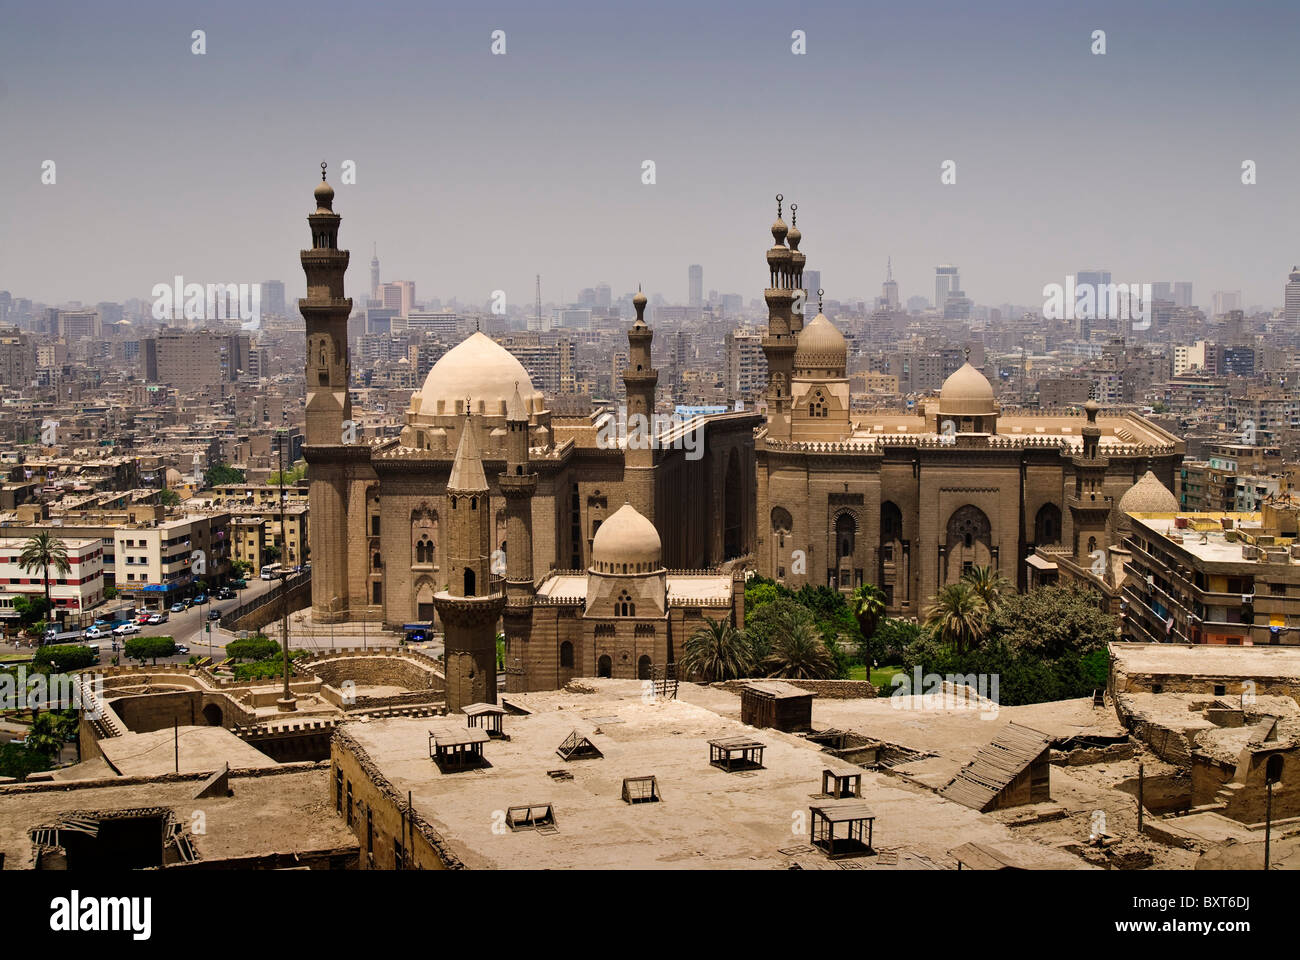 Sultan Hassan (left) and the later Al-Rifa'i mosques, as seen from The Citadel in Cairo Egypt. Stock Photo